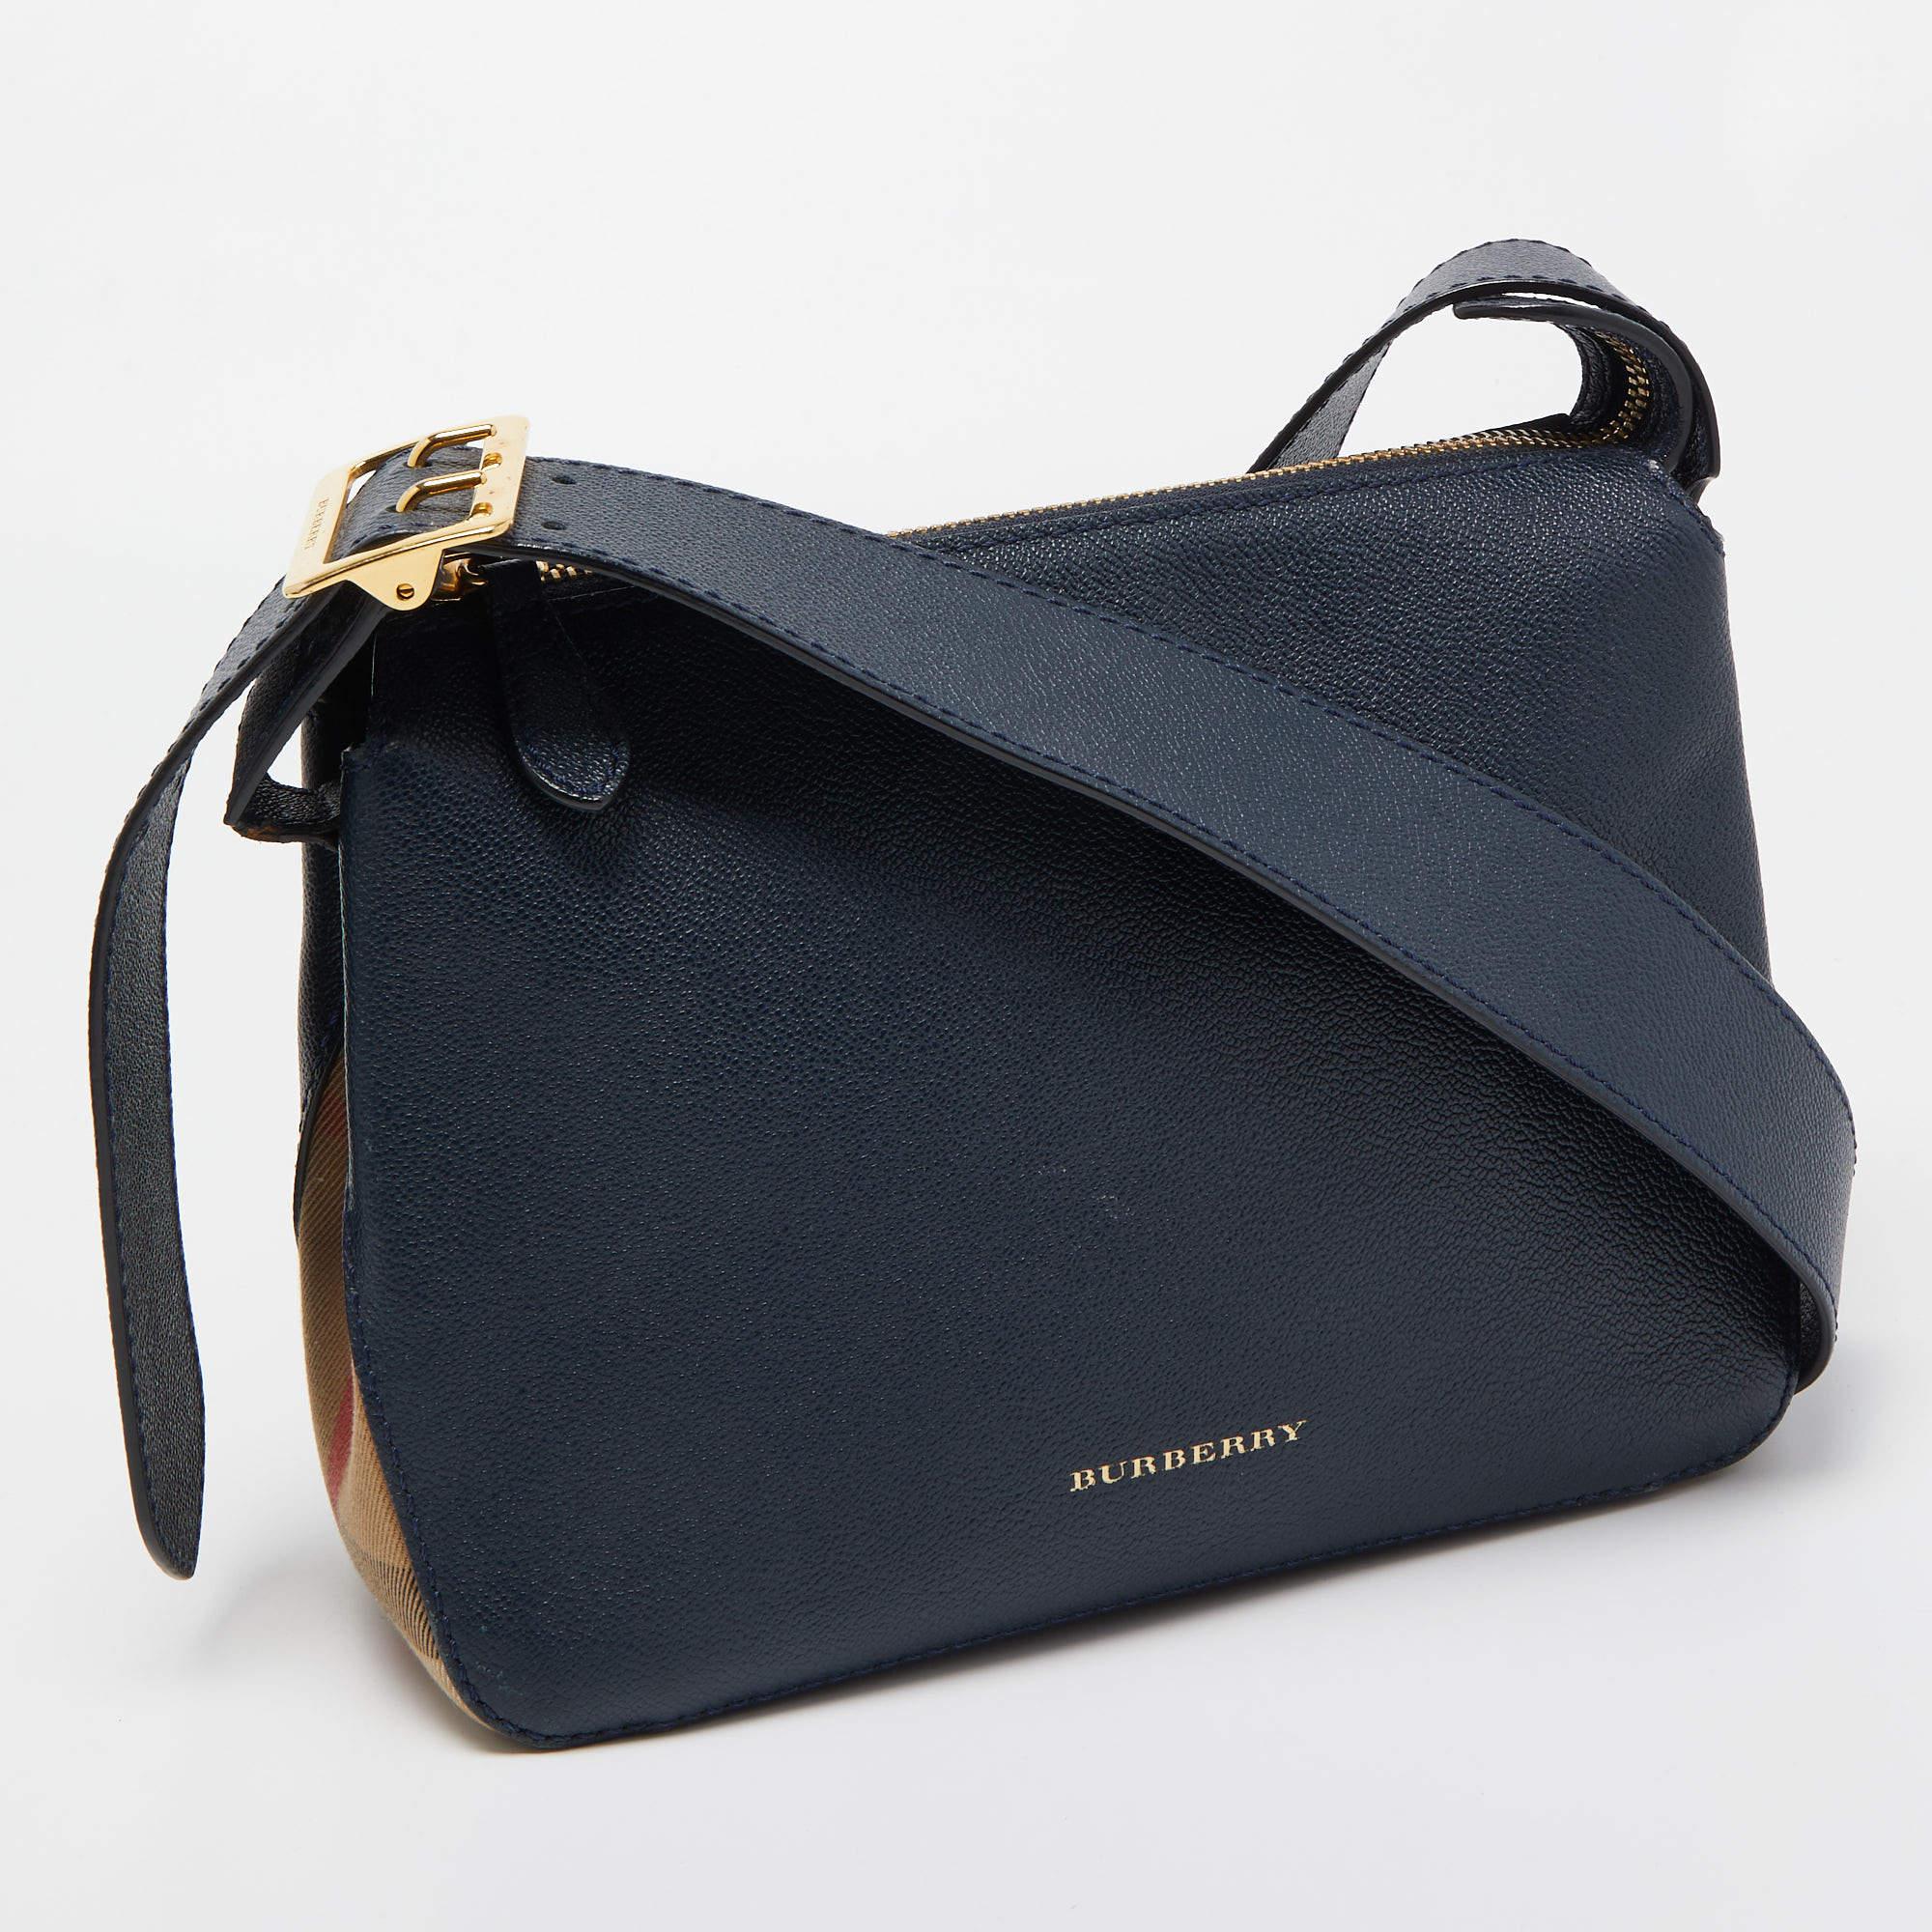 Designed to be durable, this lovely crossbody bag is a prized buy. Chic and easy to carry, the creation comes with a long shoulder strap and a spacious interior to keep your essentials safe.

